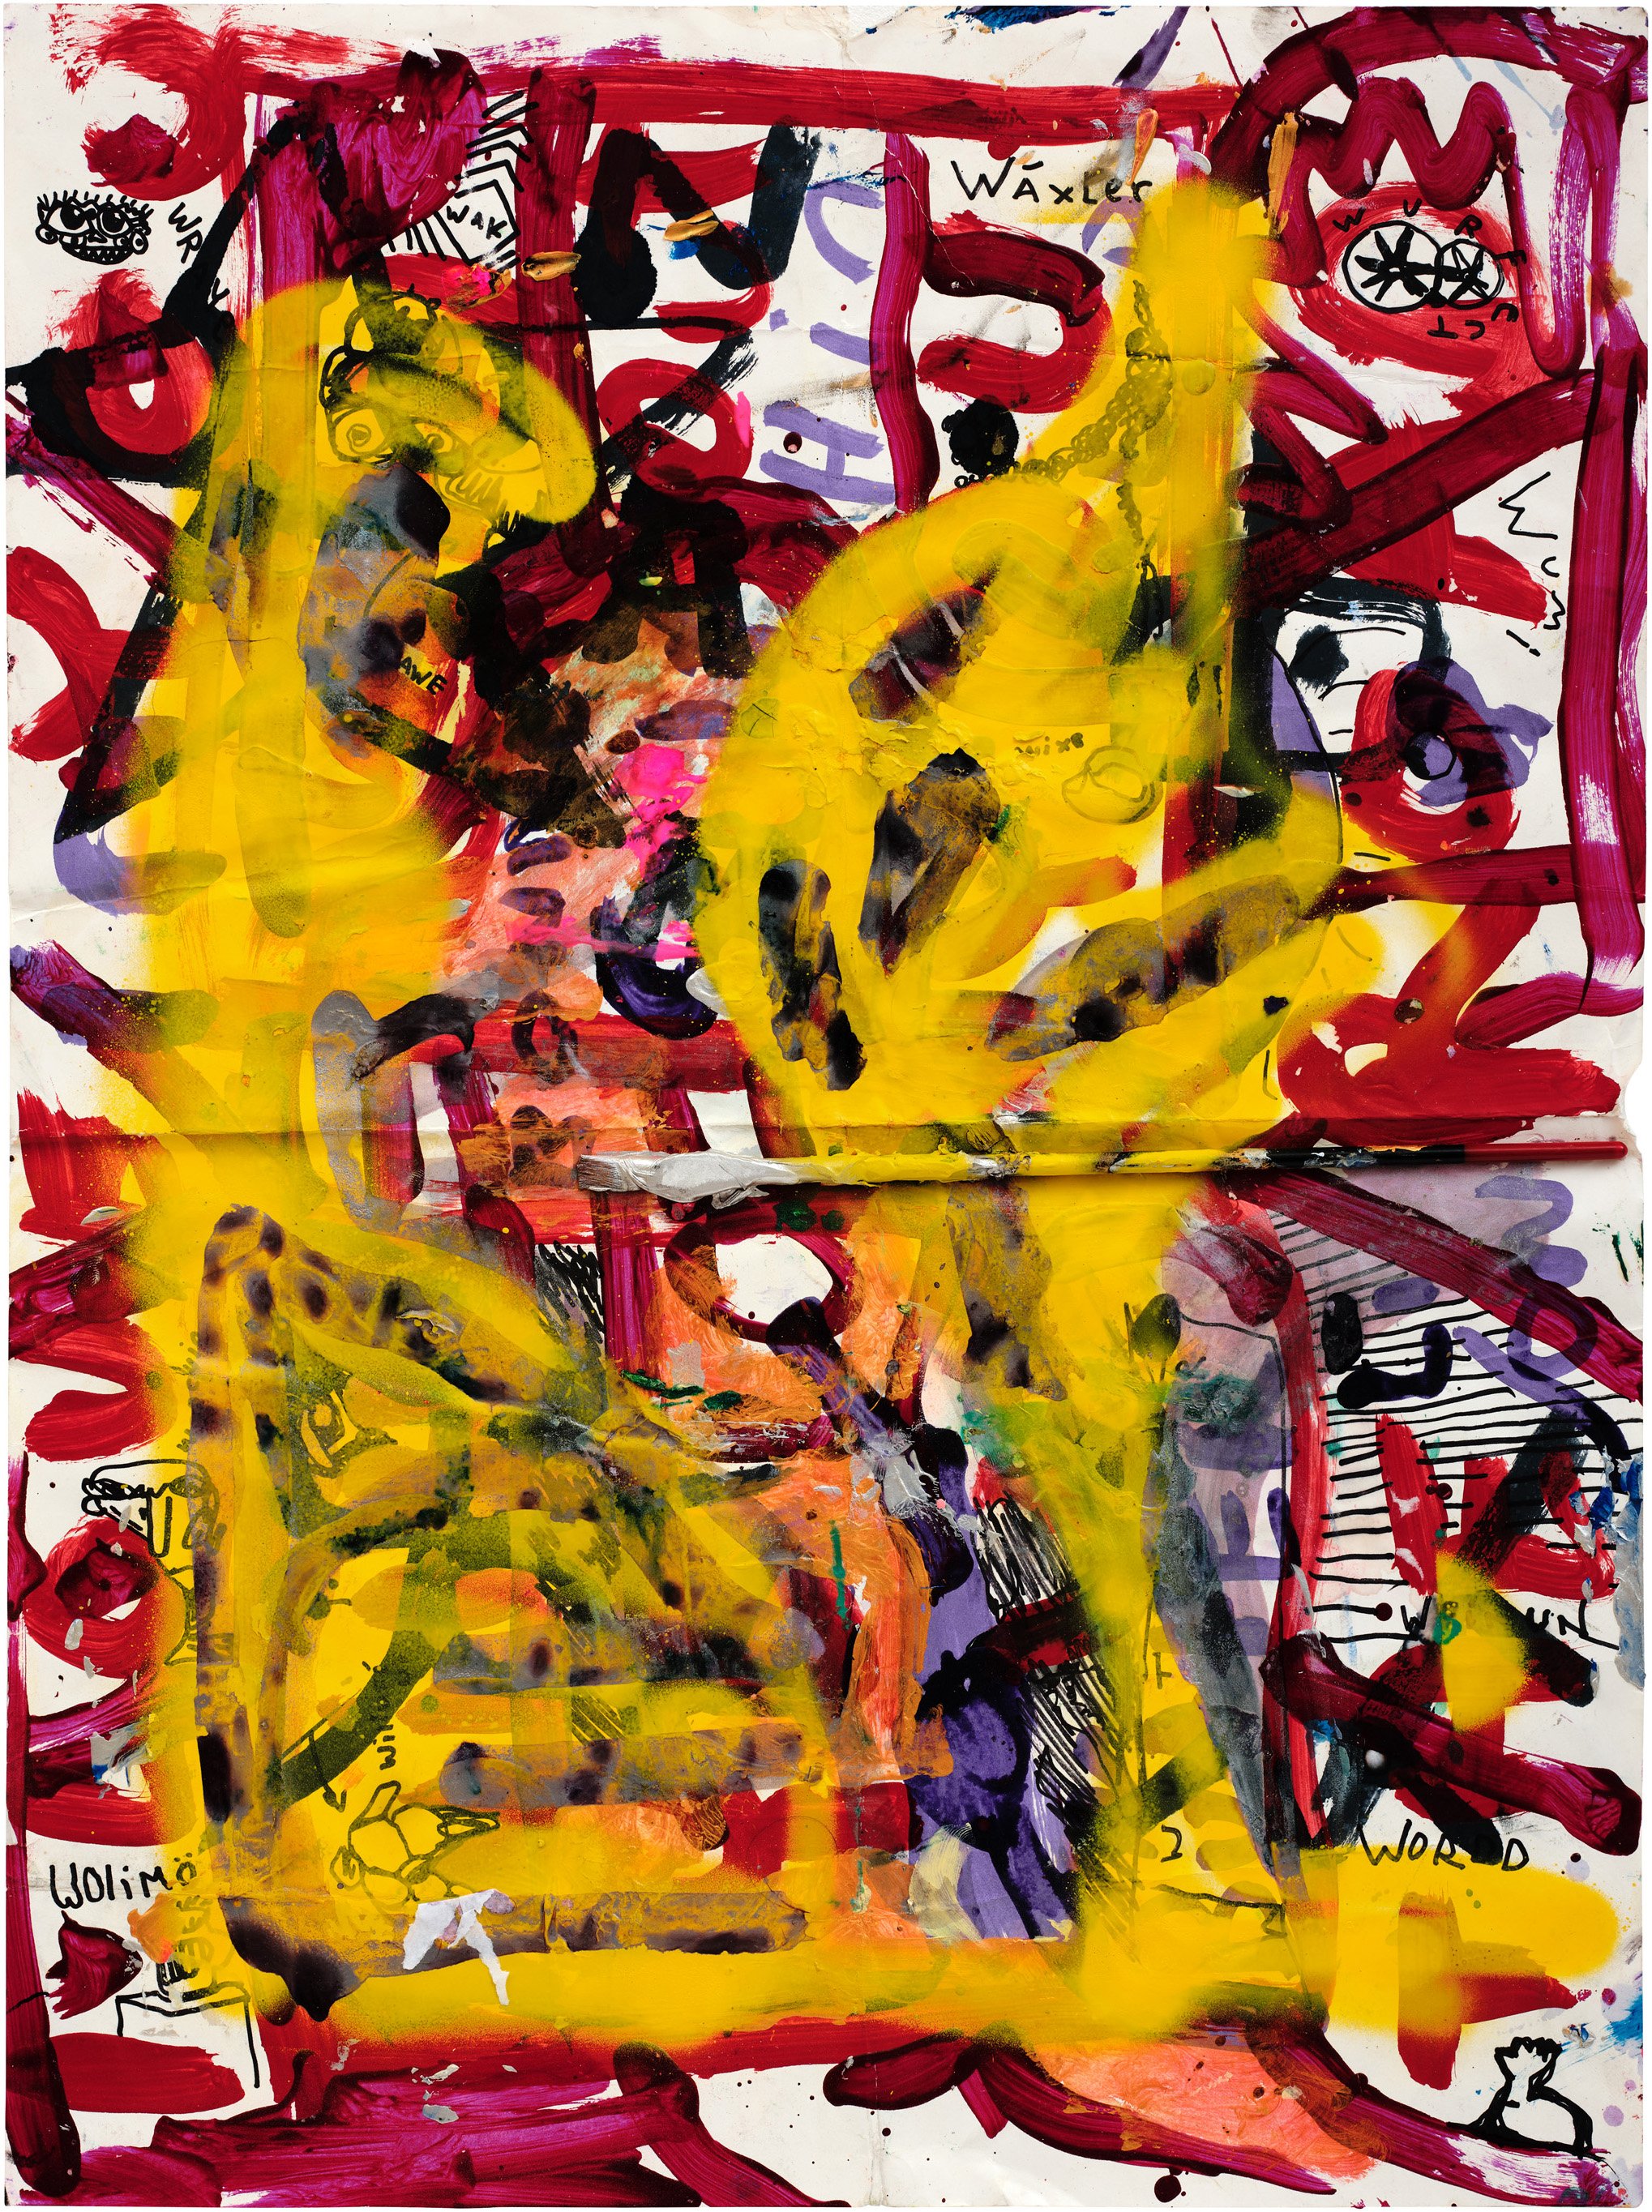  Drew Beattie and Ben Shepard  DBBS-DRW-2019-282   2019 acrylic, spray paint, marker and brush on paper 24 x 18 inches 